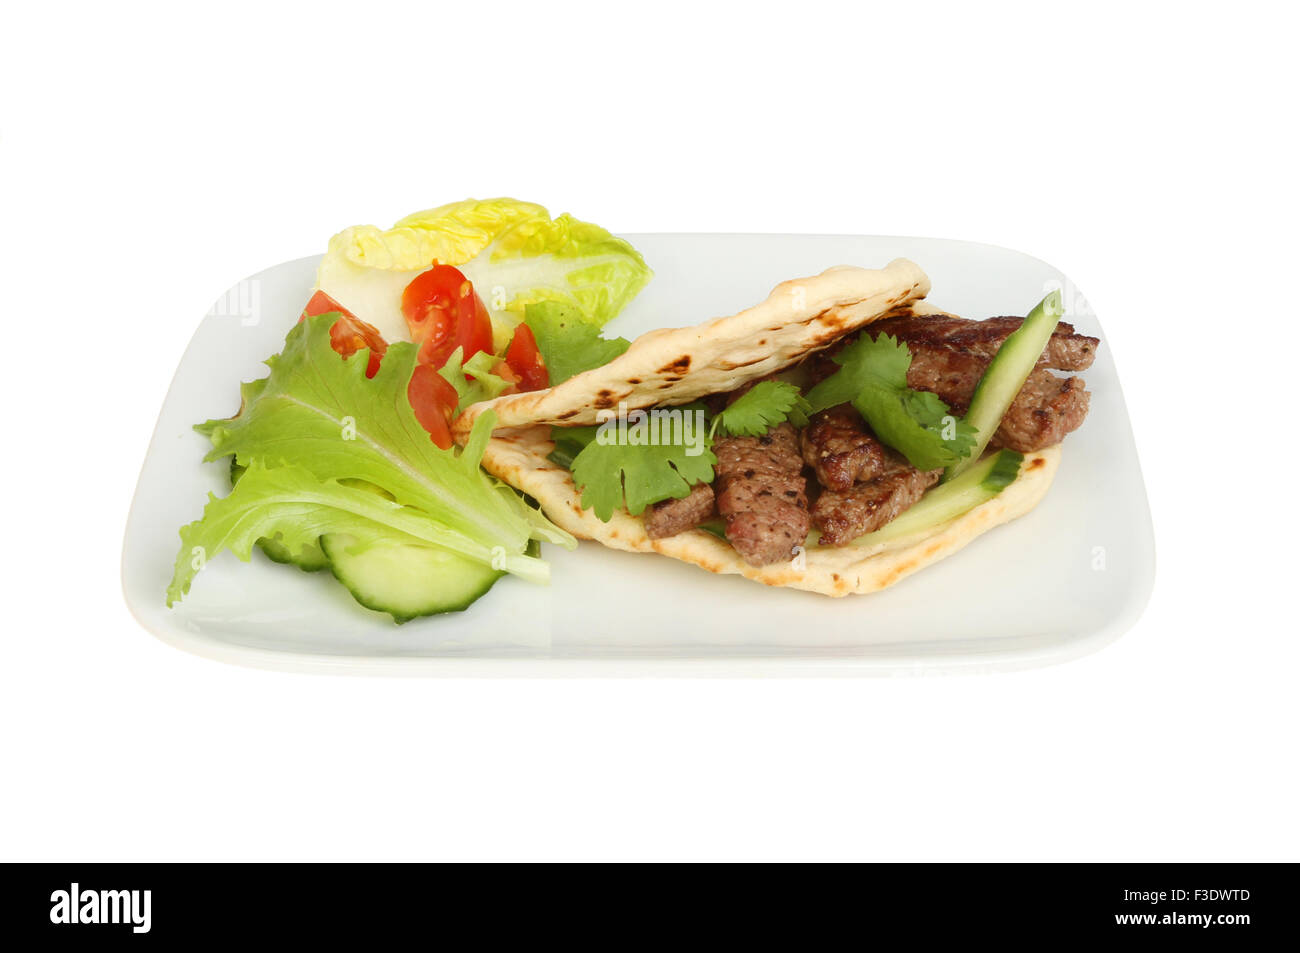 Fried minute steak in a flatbread kebab style with salad on a plate isolated against white Stock Photo